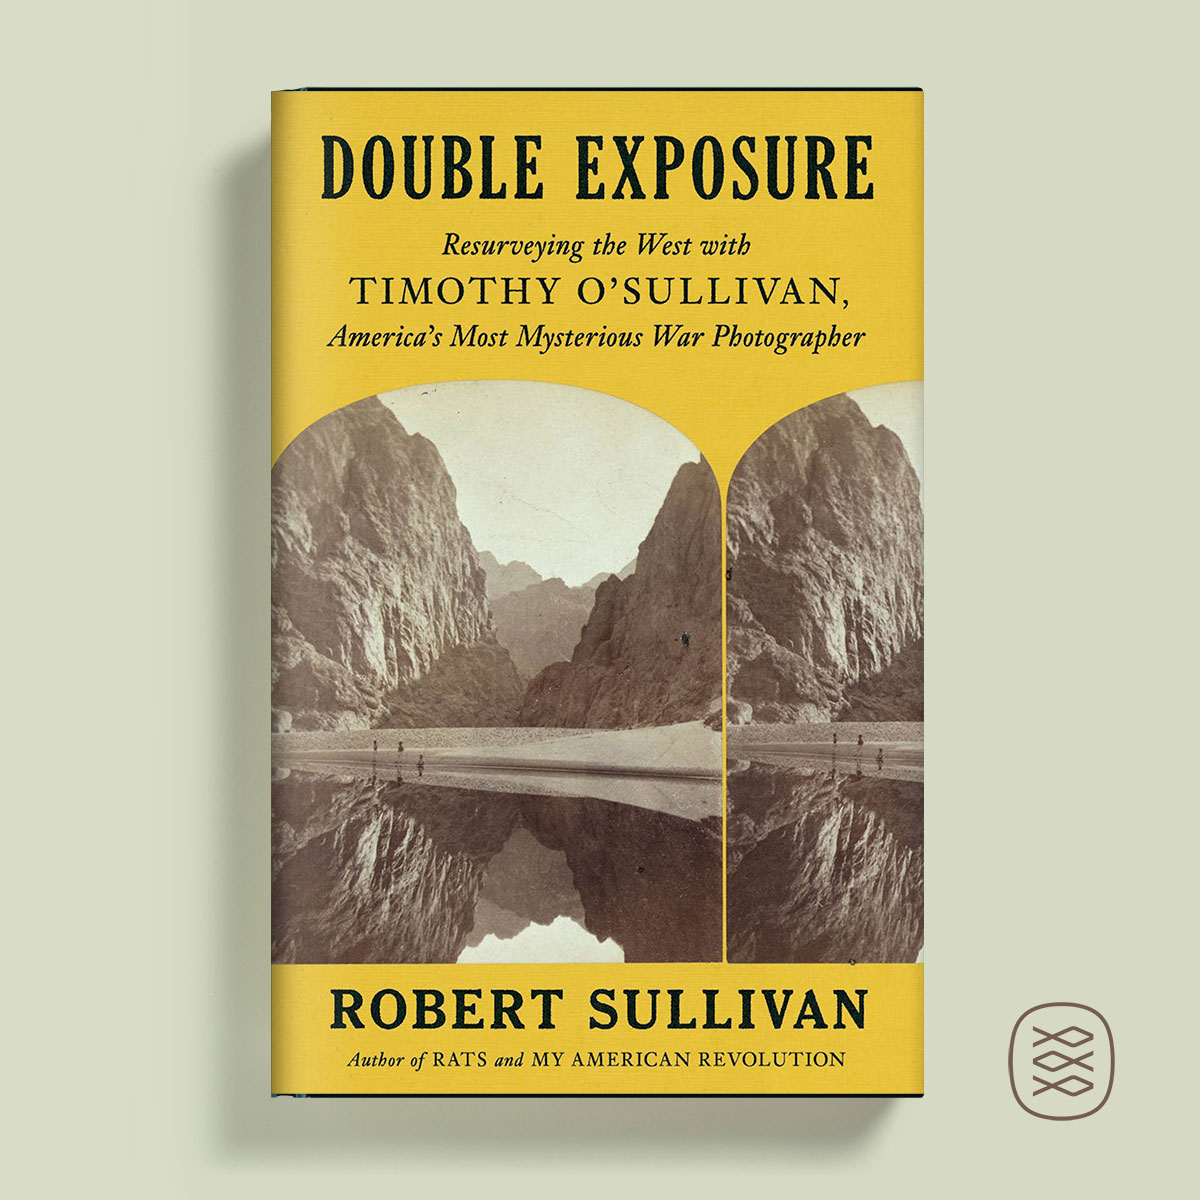 Out today! DOUBLE EXPOSURE is a personal exploration of the American West and the work of one of America’s greatest photographers, Timothy O’Sullivan. bit.ly/3UsWcd7